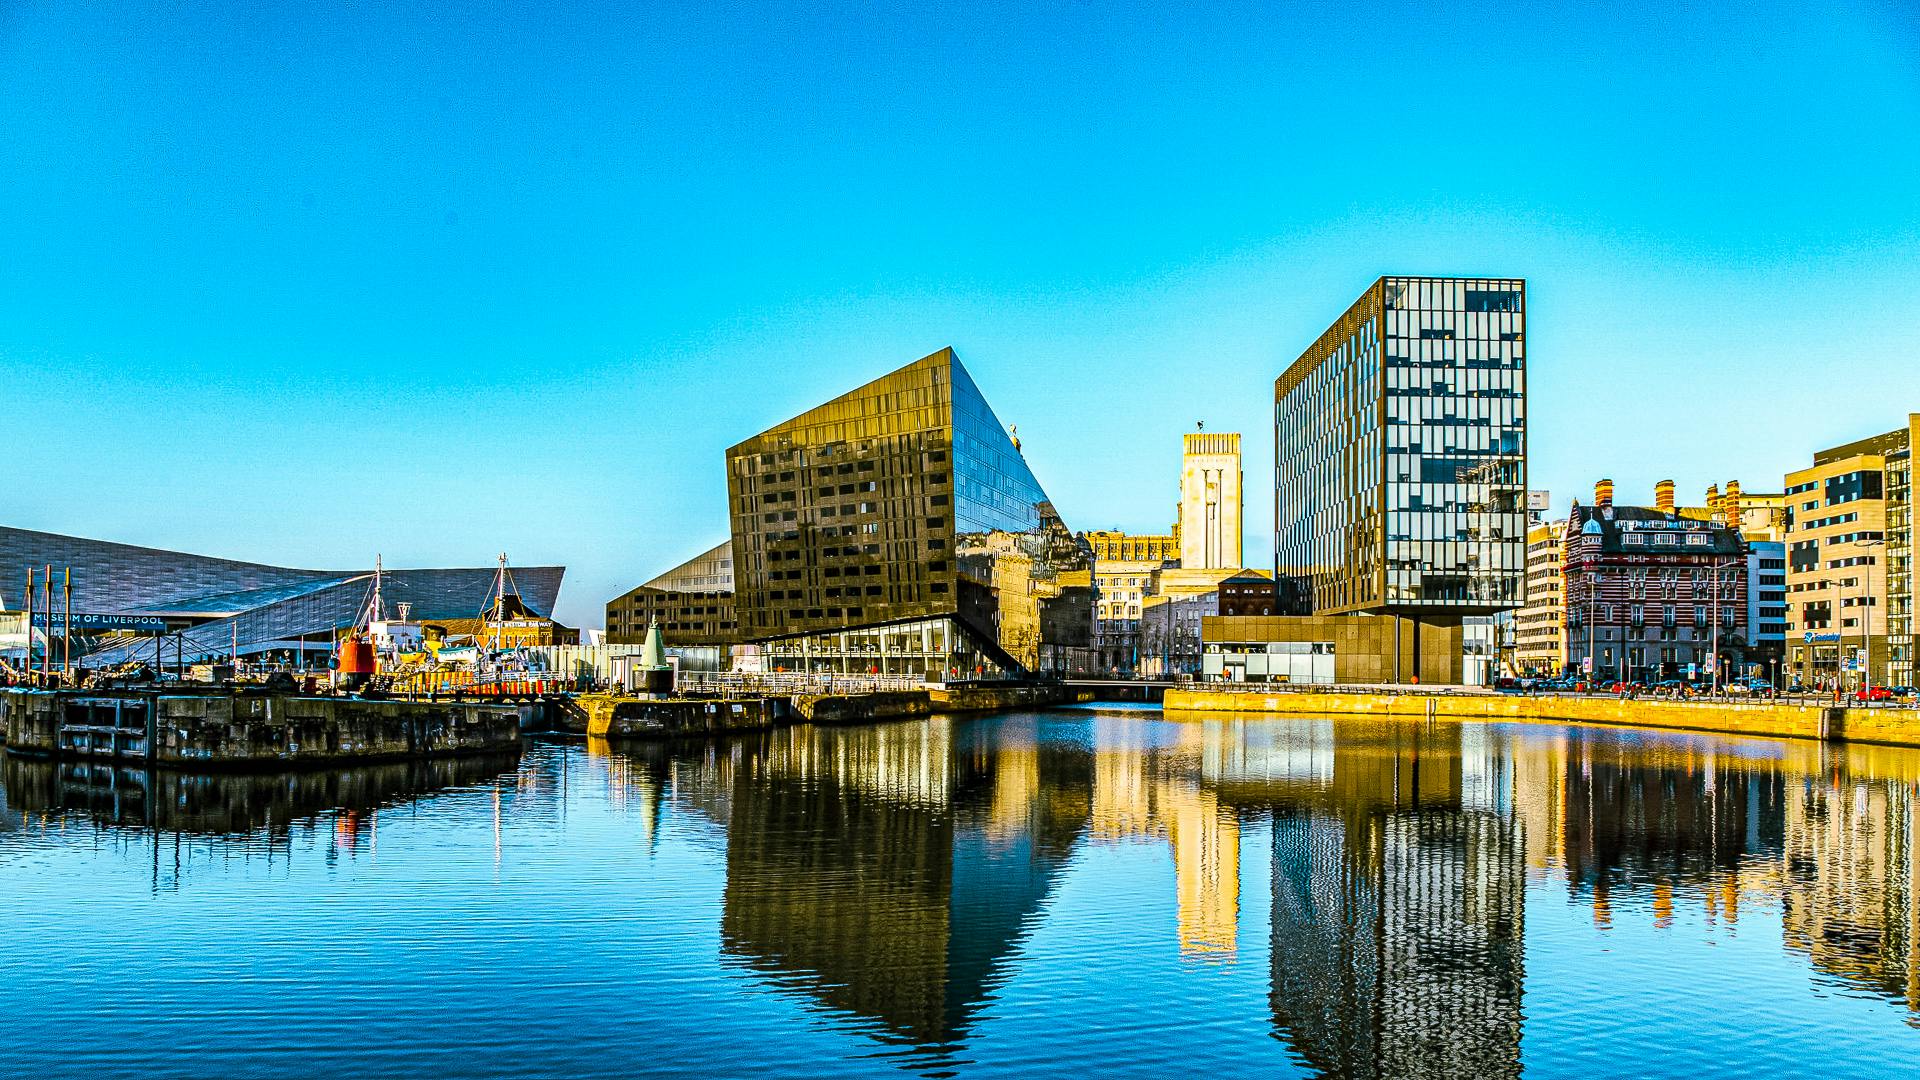 Image of Liverpool